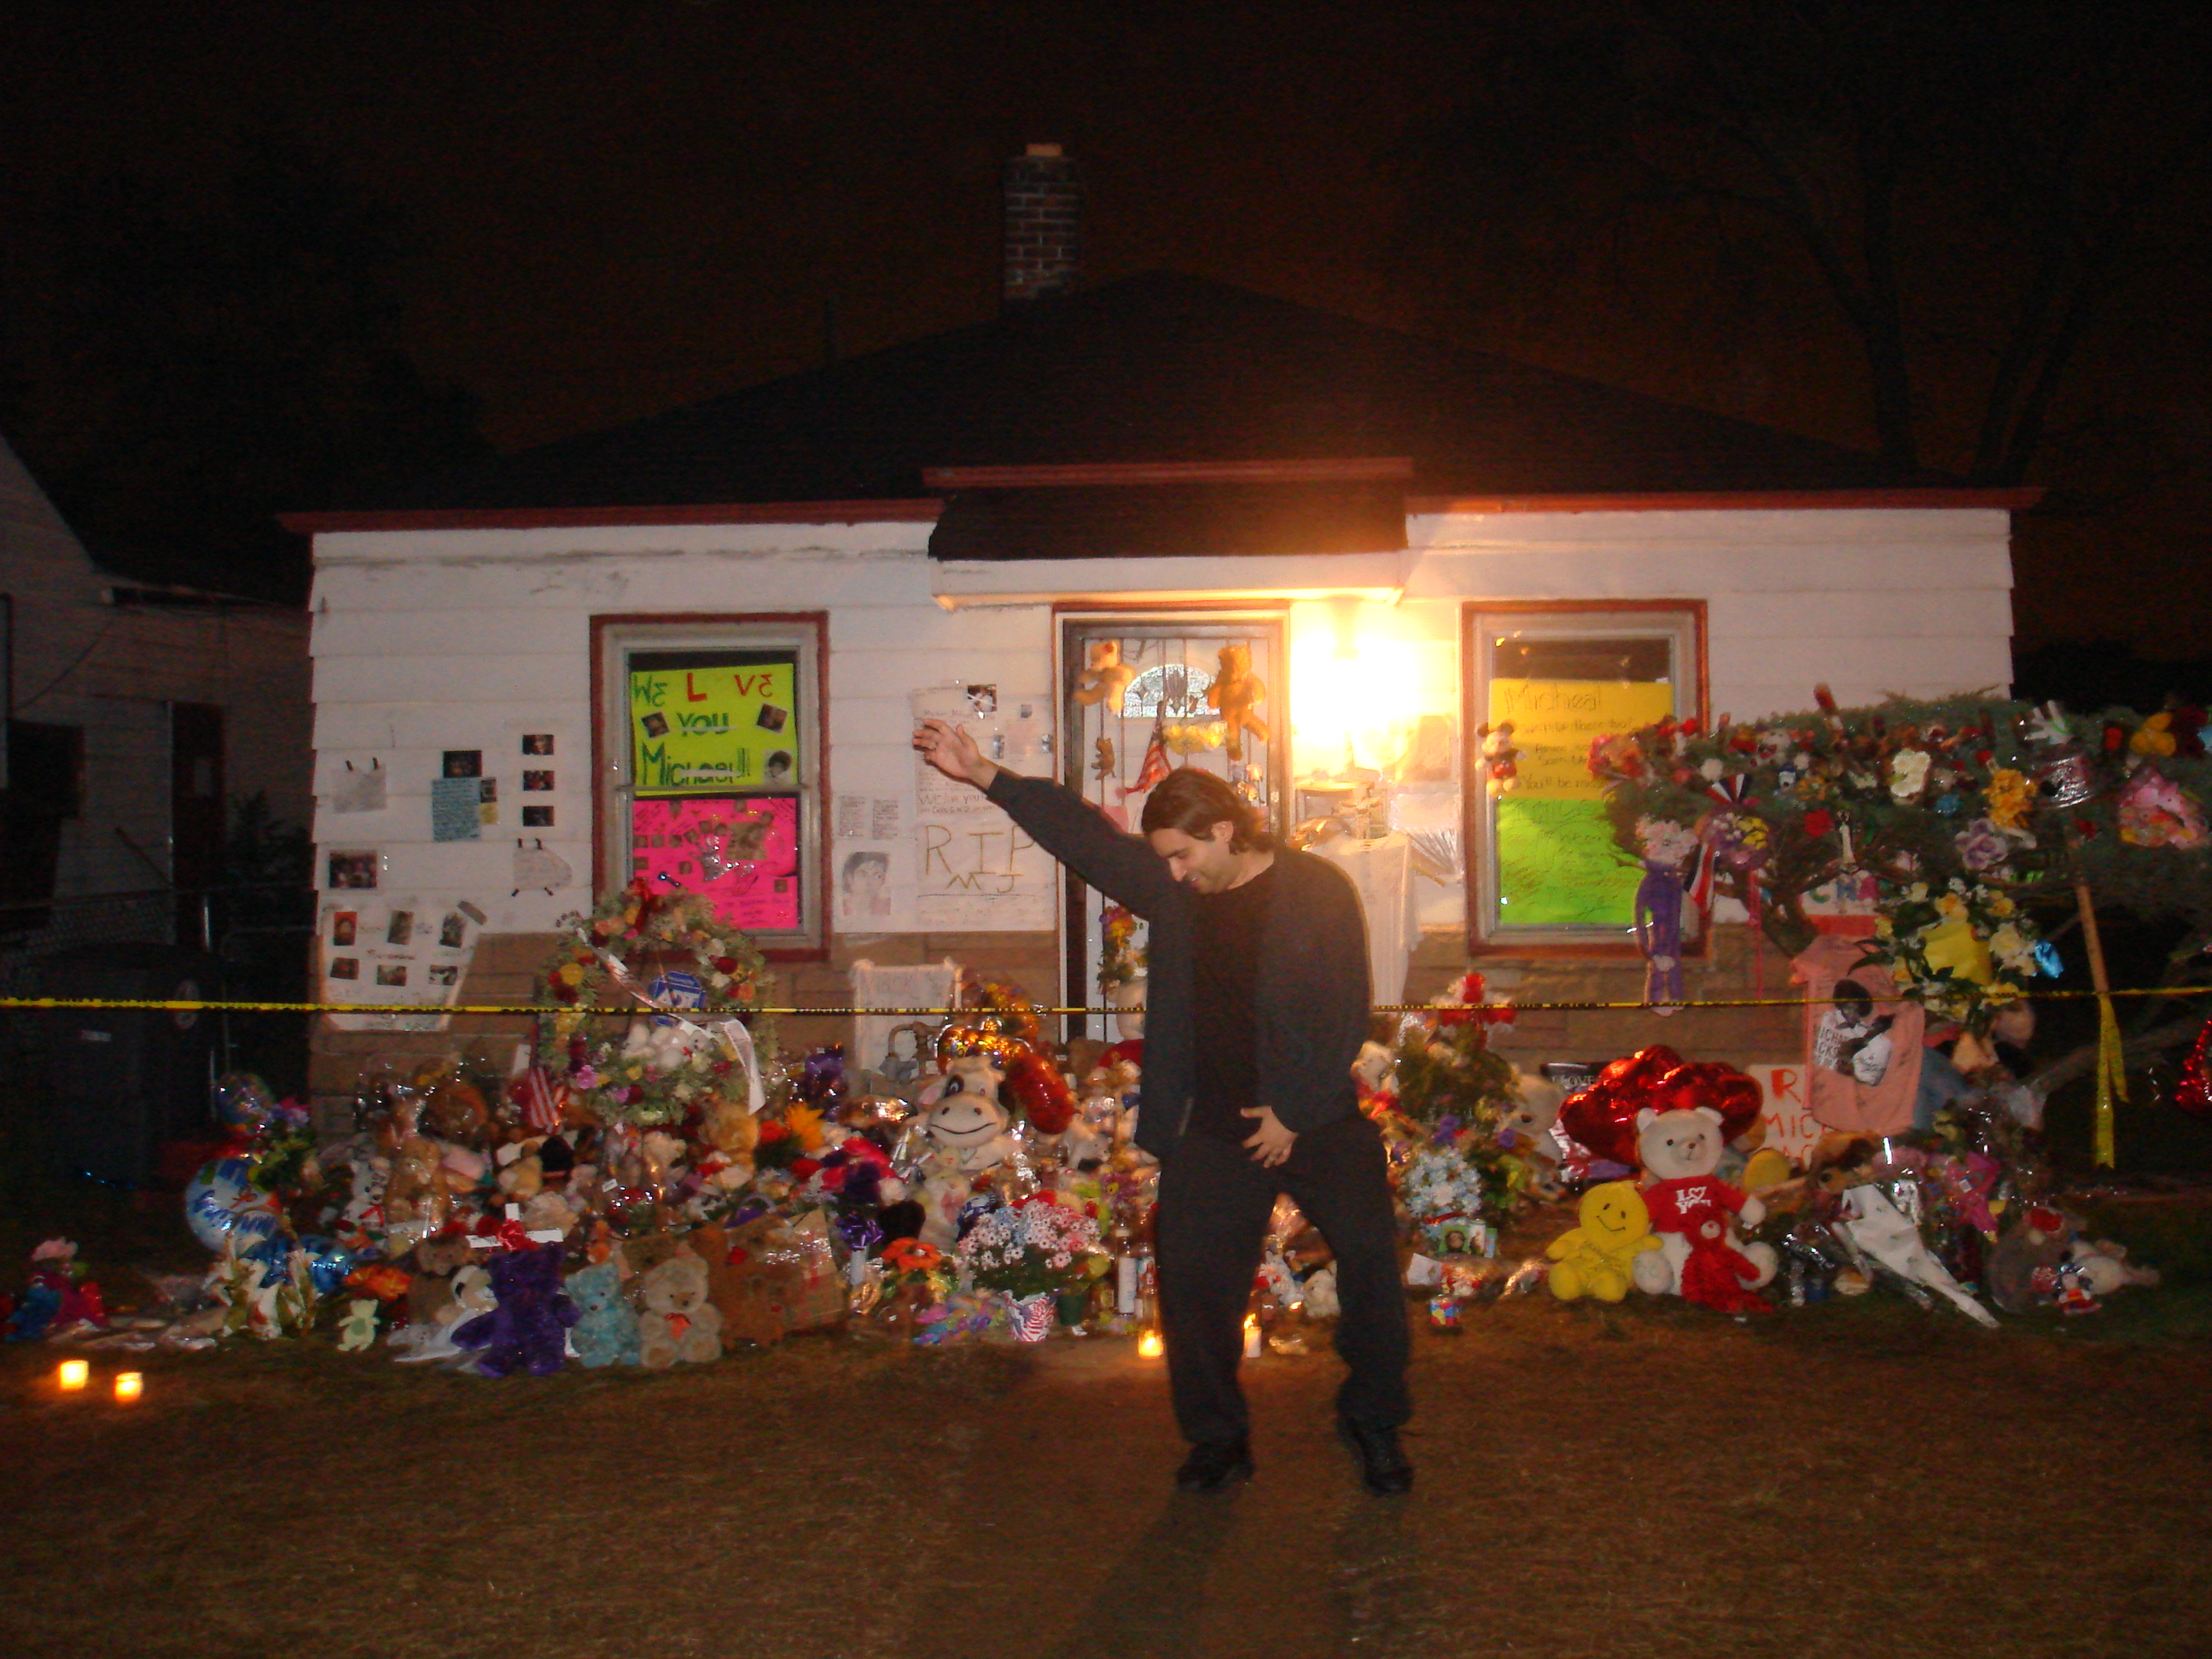 Ronnie Banerjee dancing at Michael Jackson's childhood home in Gary, Indiana